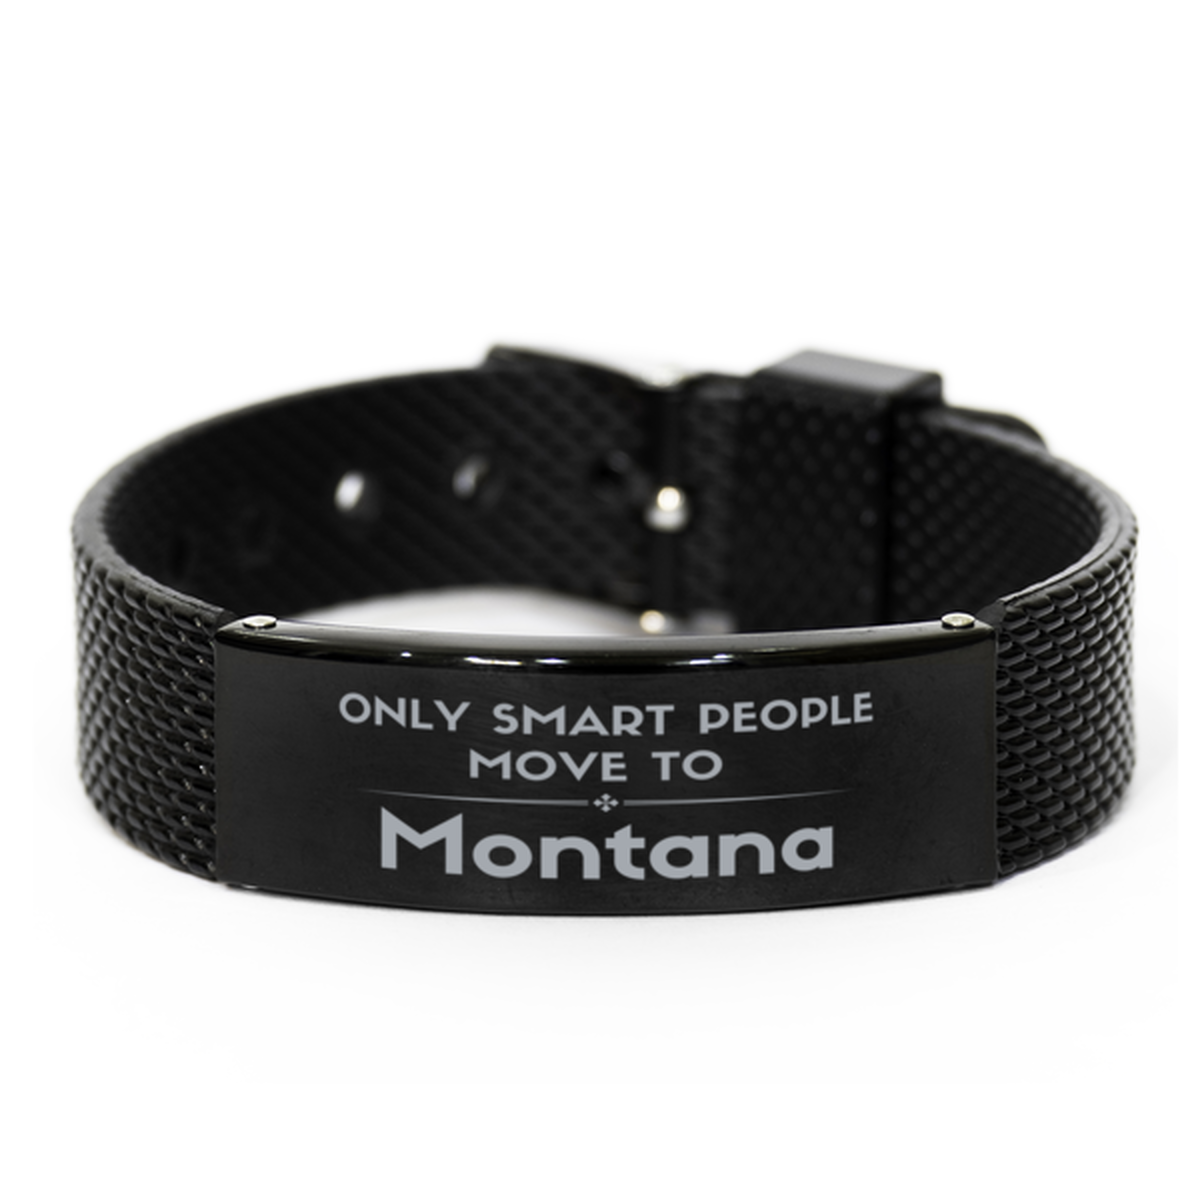 Only smart people move to Montana Black Shark Mesh Bracelet, Gag Gifts For Montana, Move to Montana Gifts for Friends Coworker Funny Saying Quote